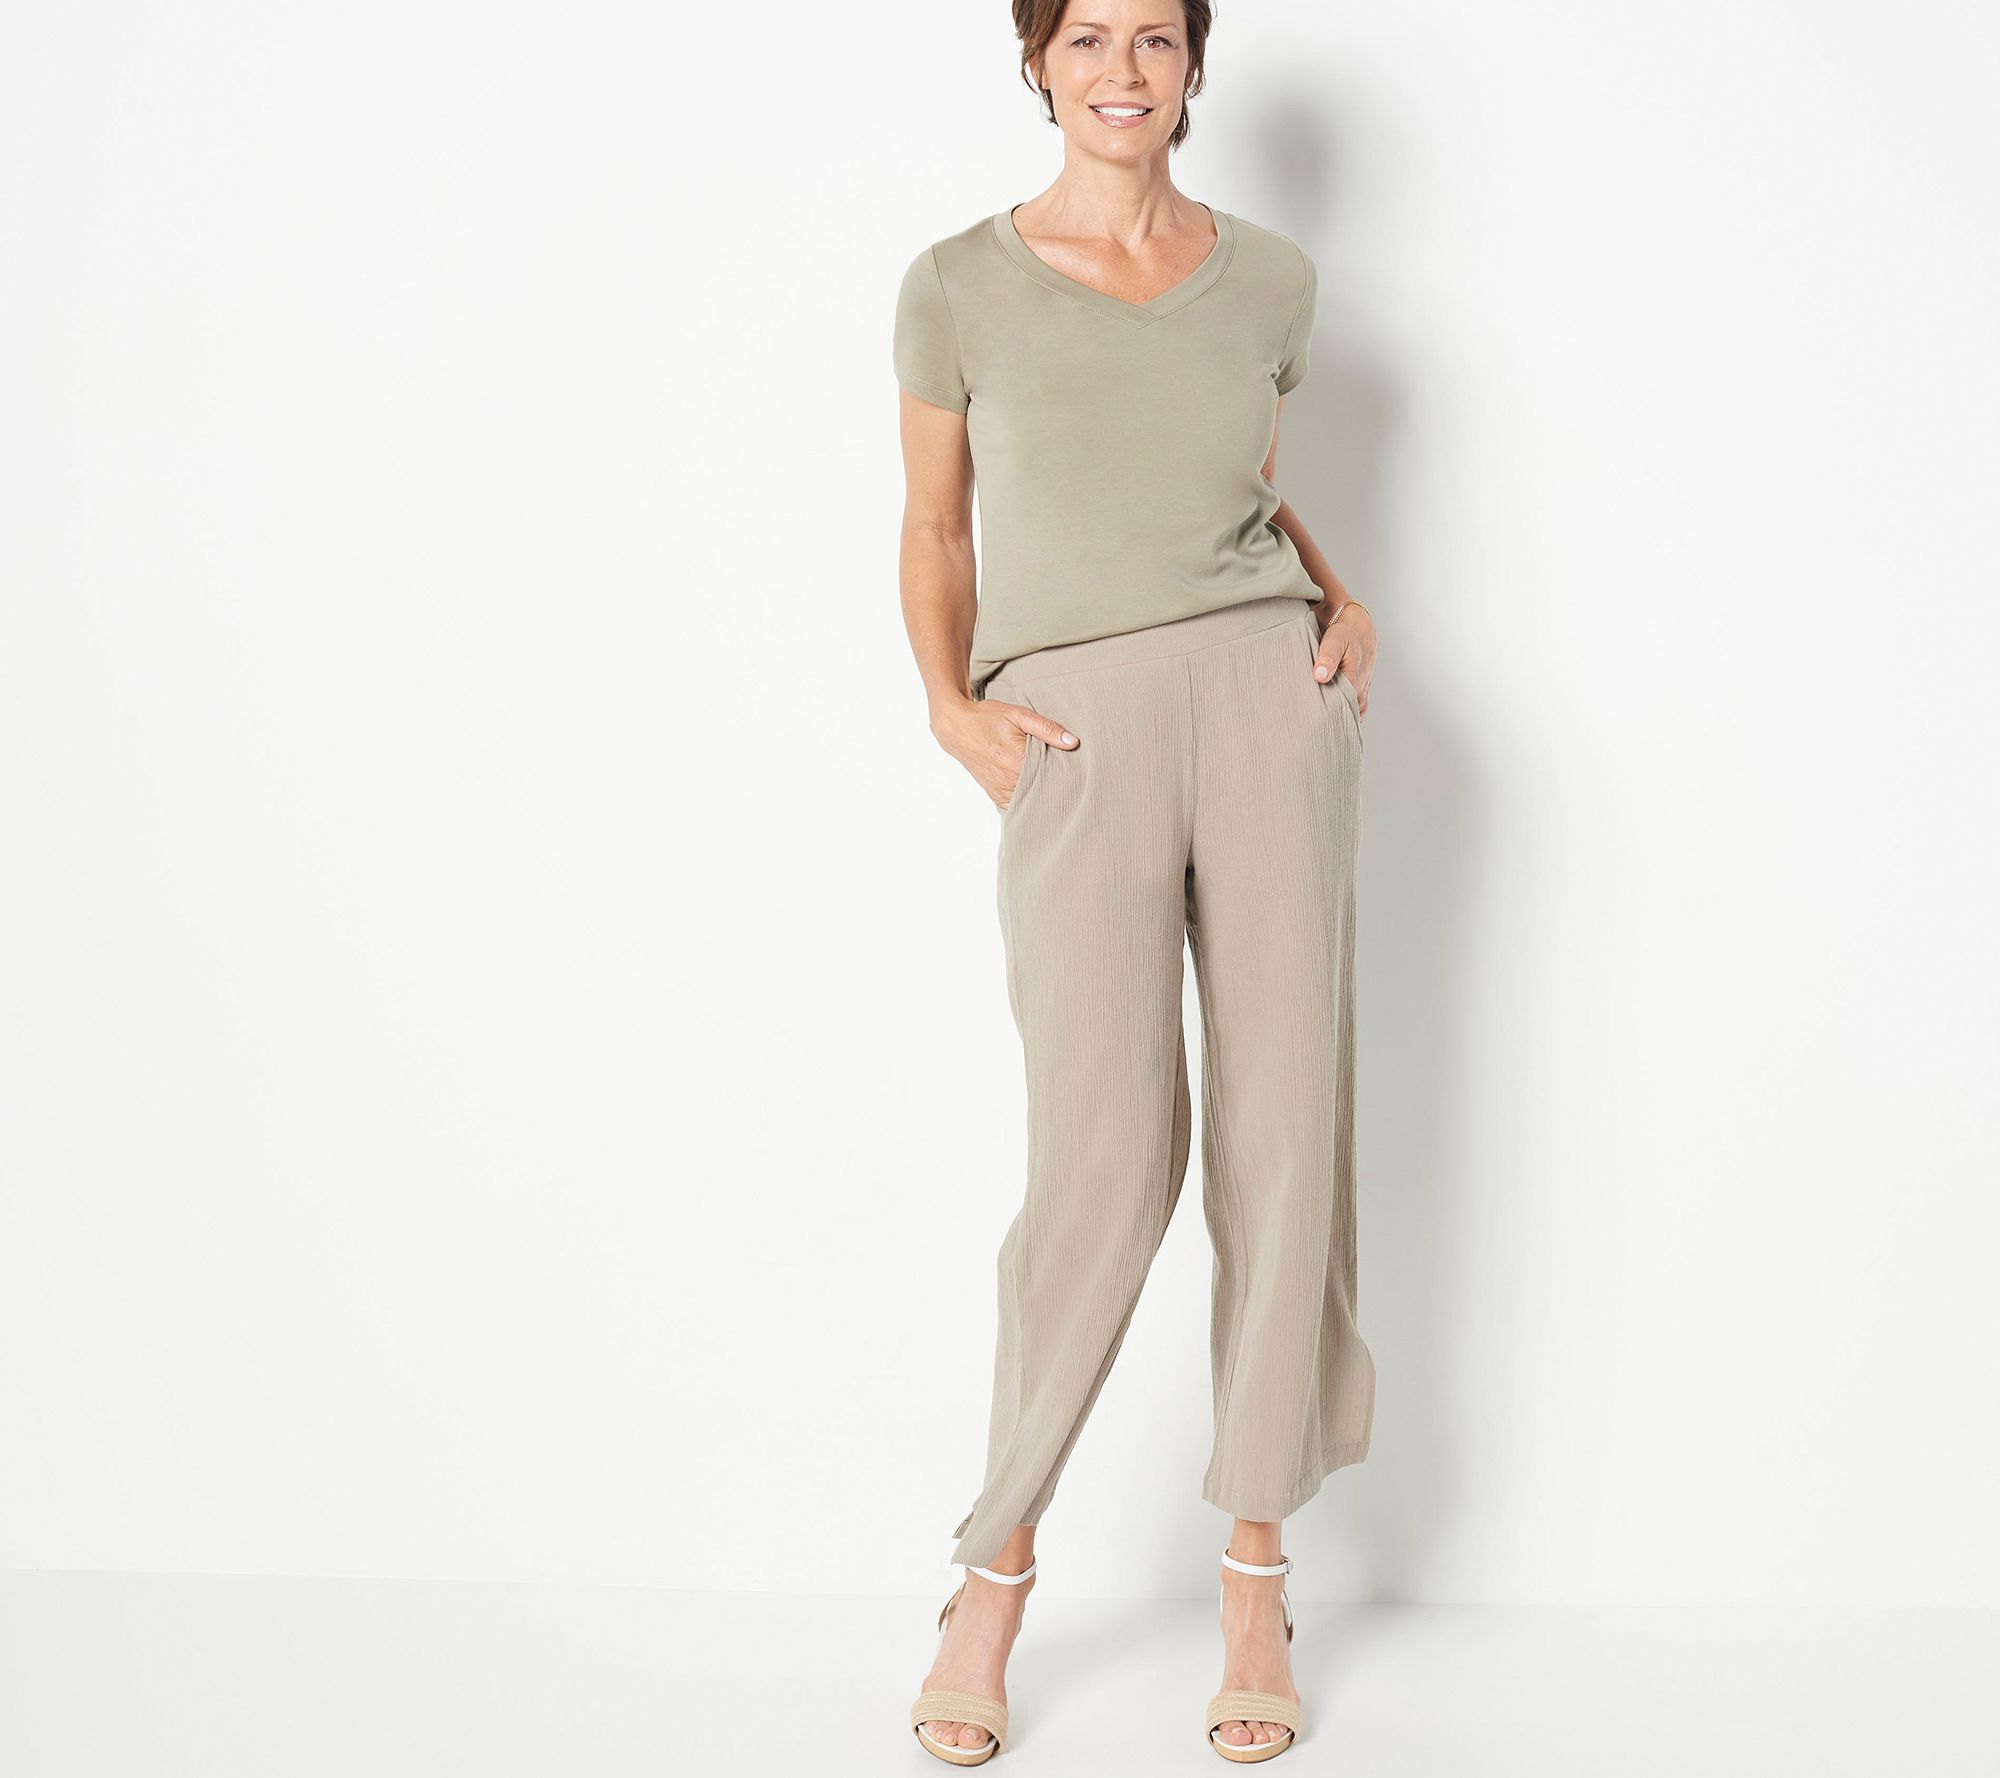 NWT Uniqlo Women Size S EZY Tucked Ankle Length Pants PullOn